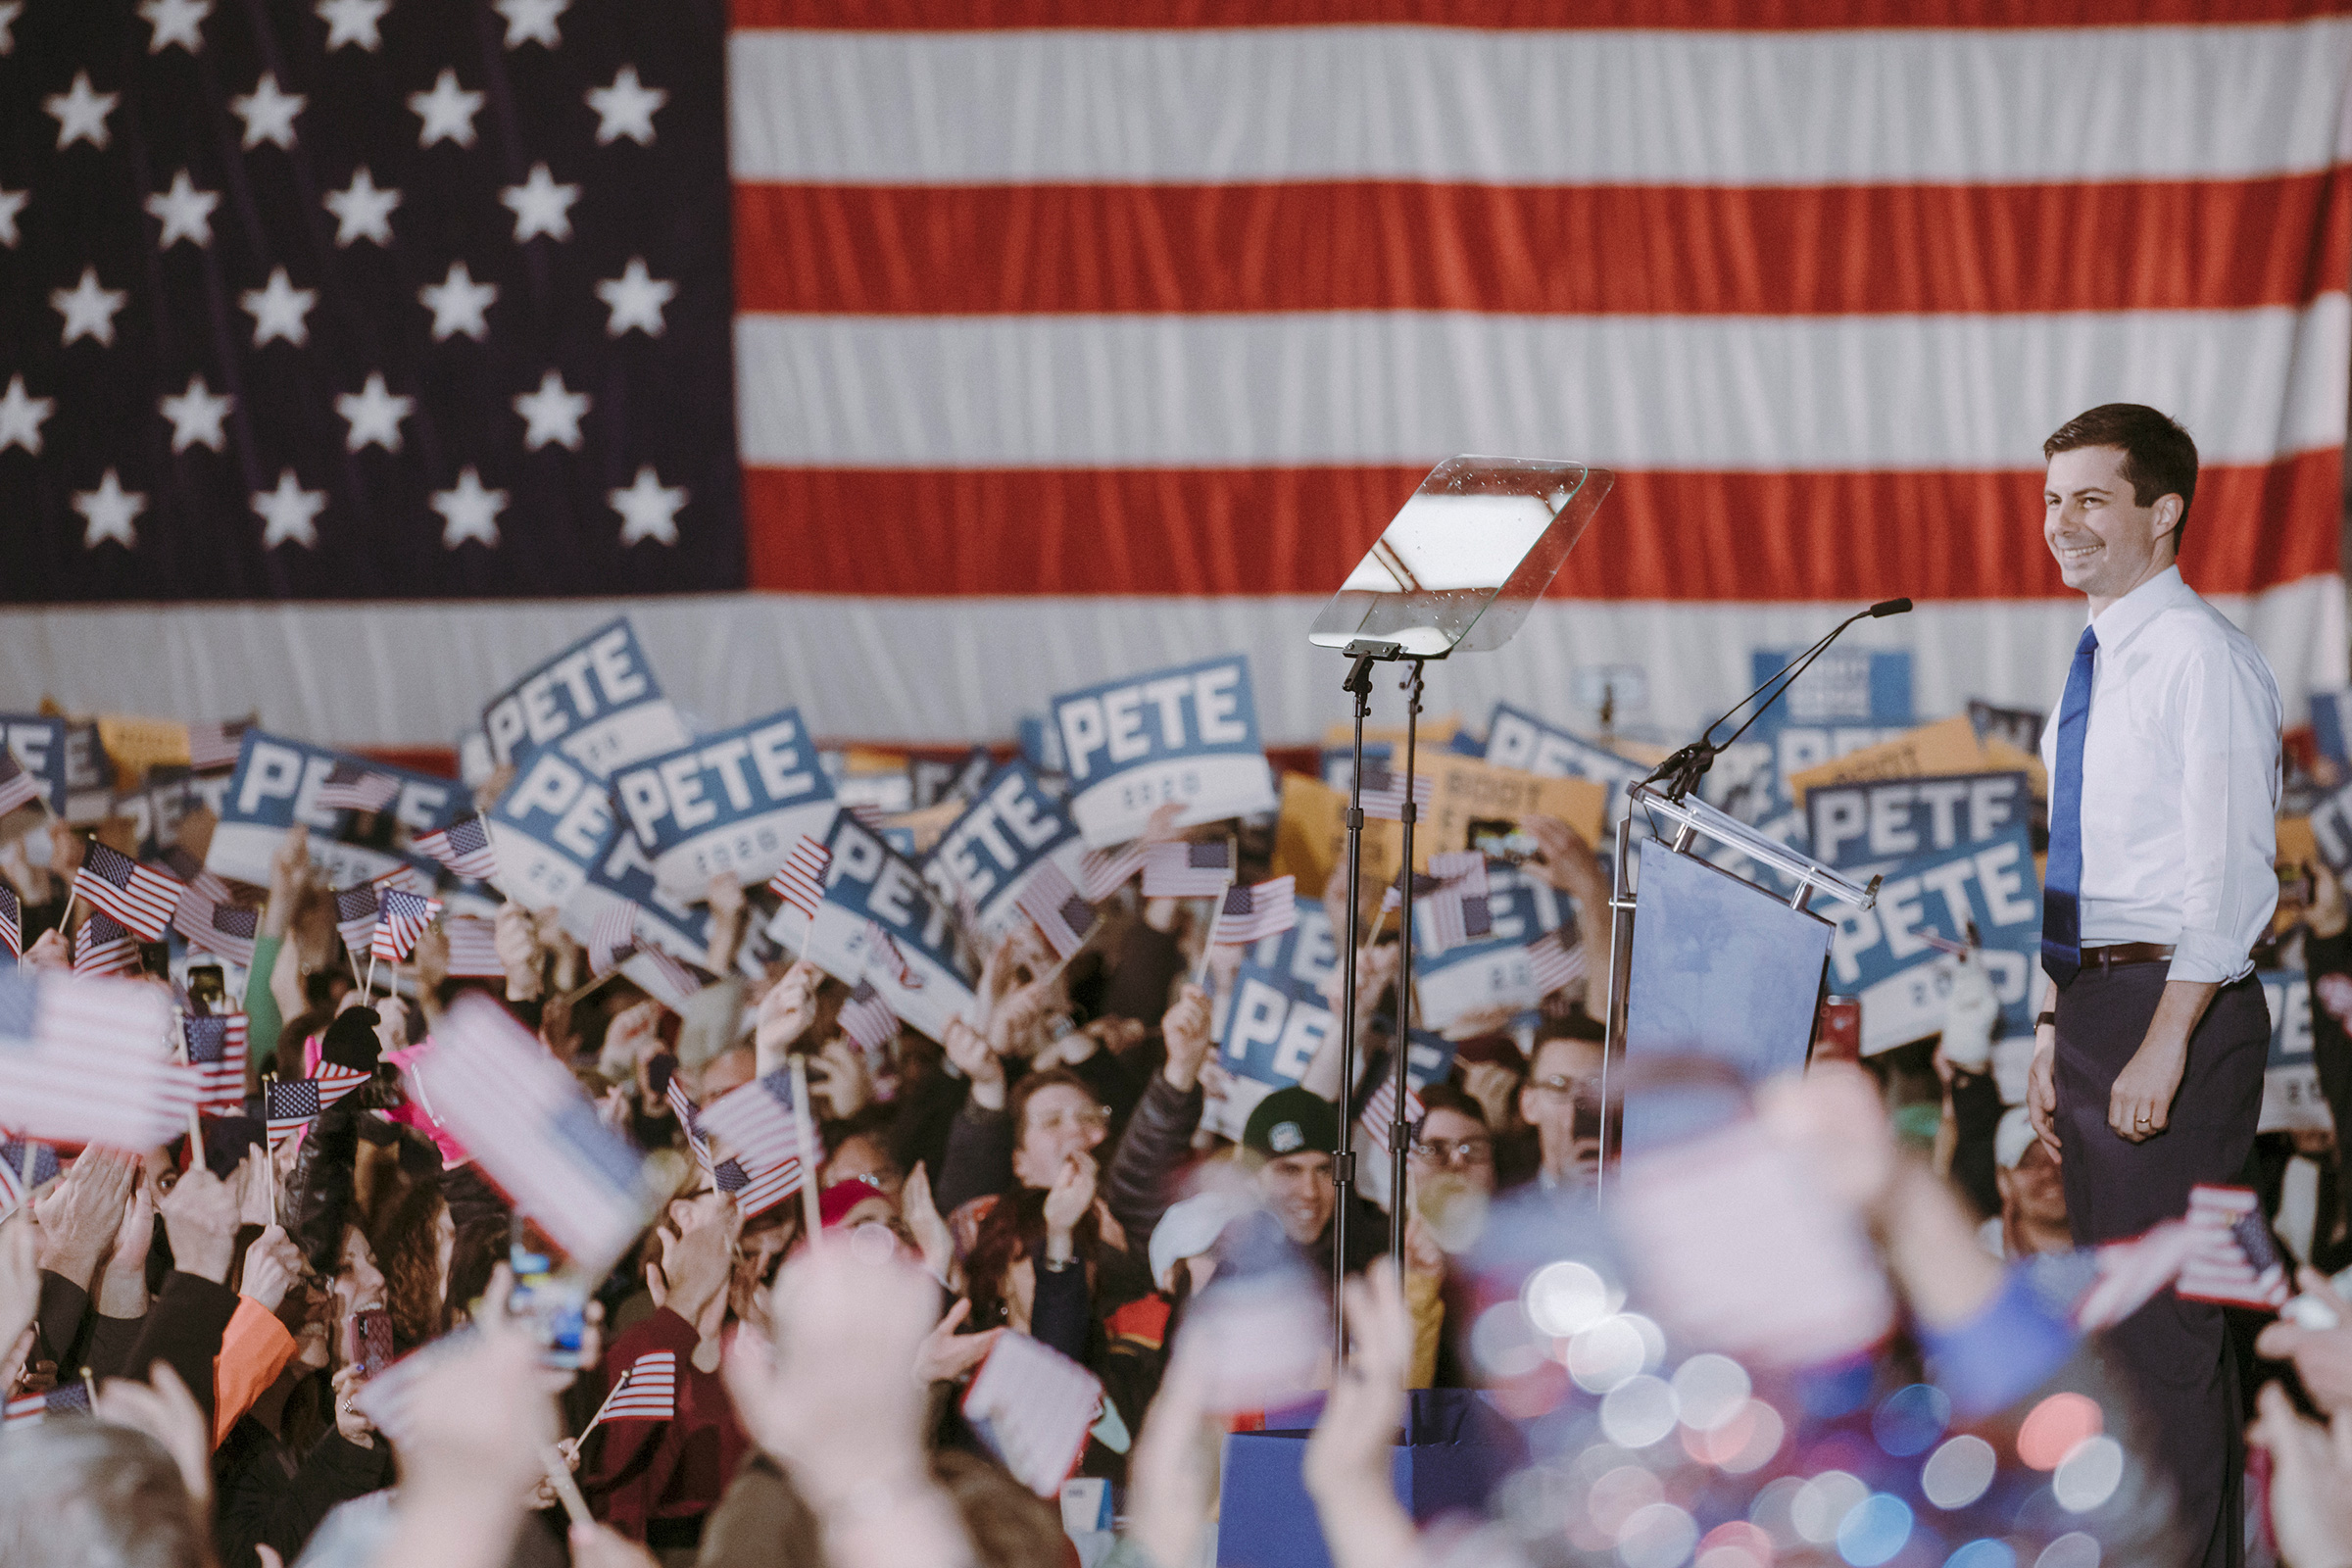 Mayor Pete Buttigieg on April 14 at his presidential campaign announcement in South Bend. (Elliot Ross for TIME)